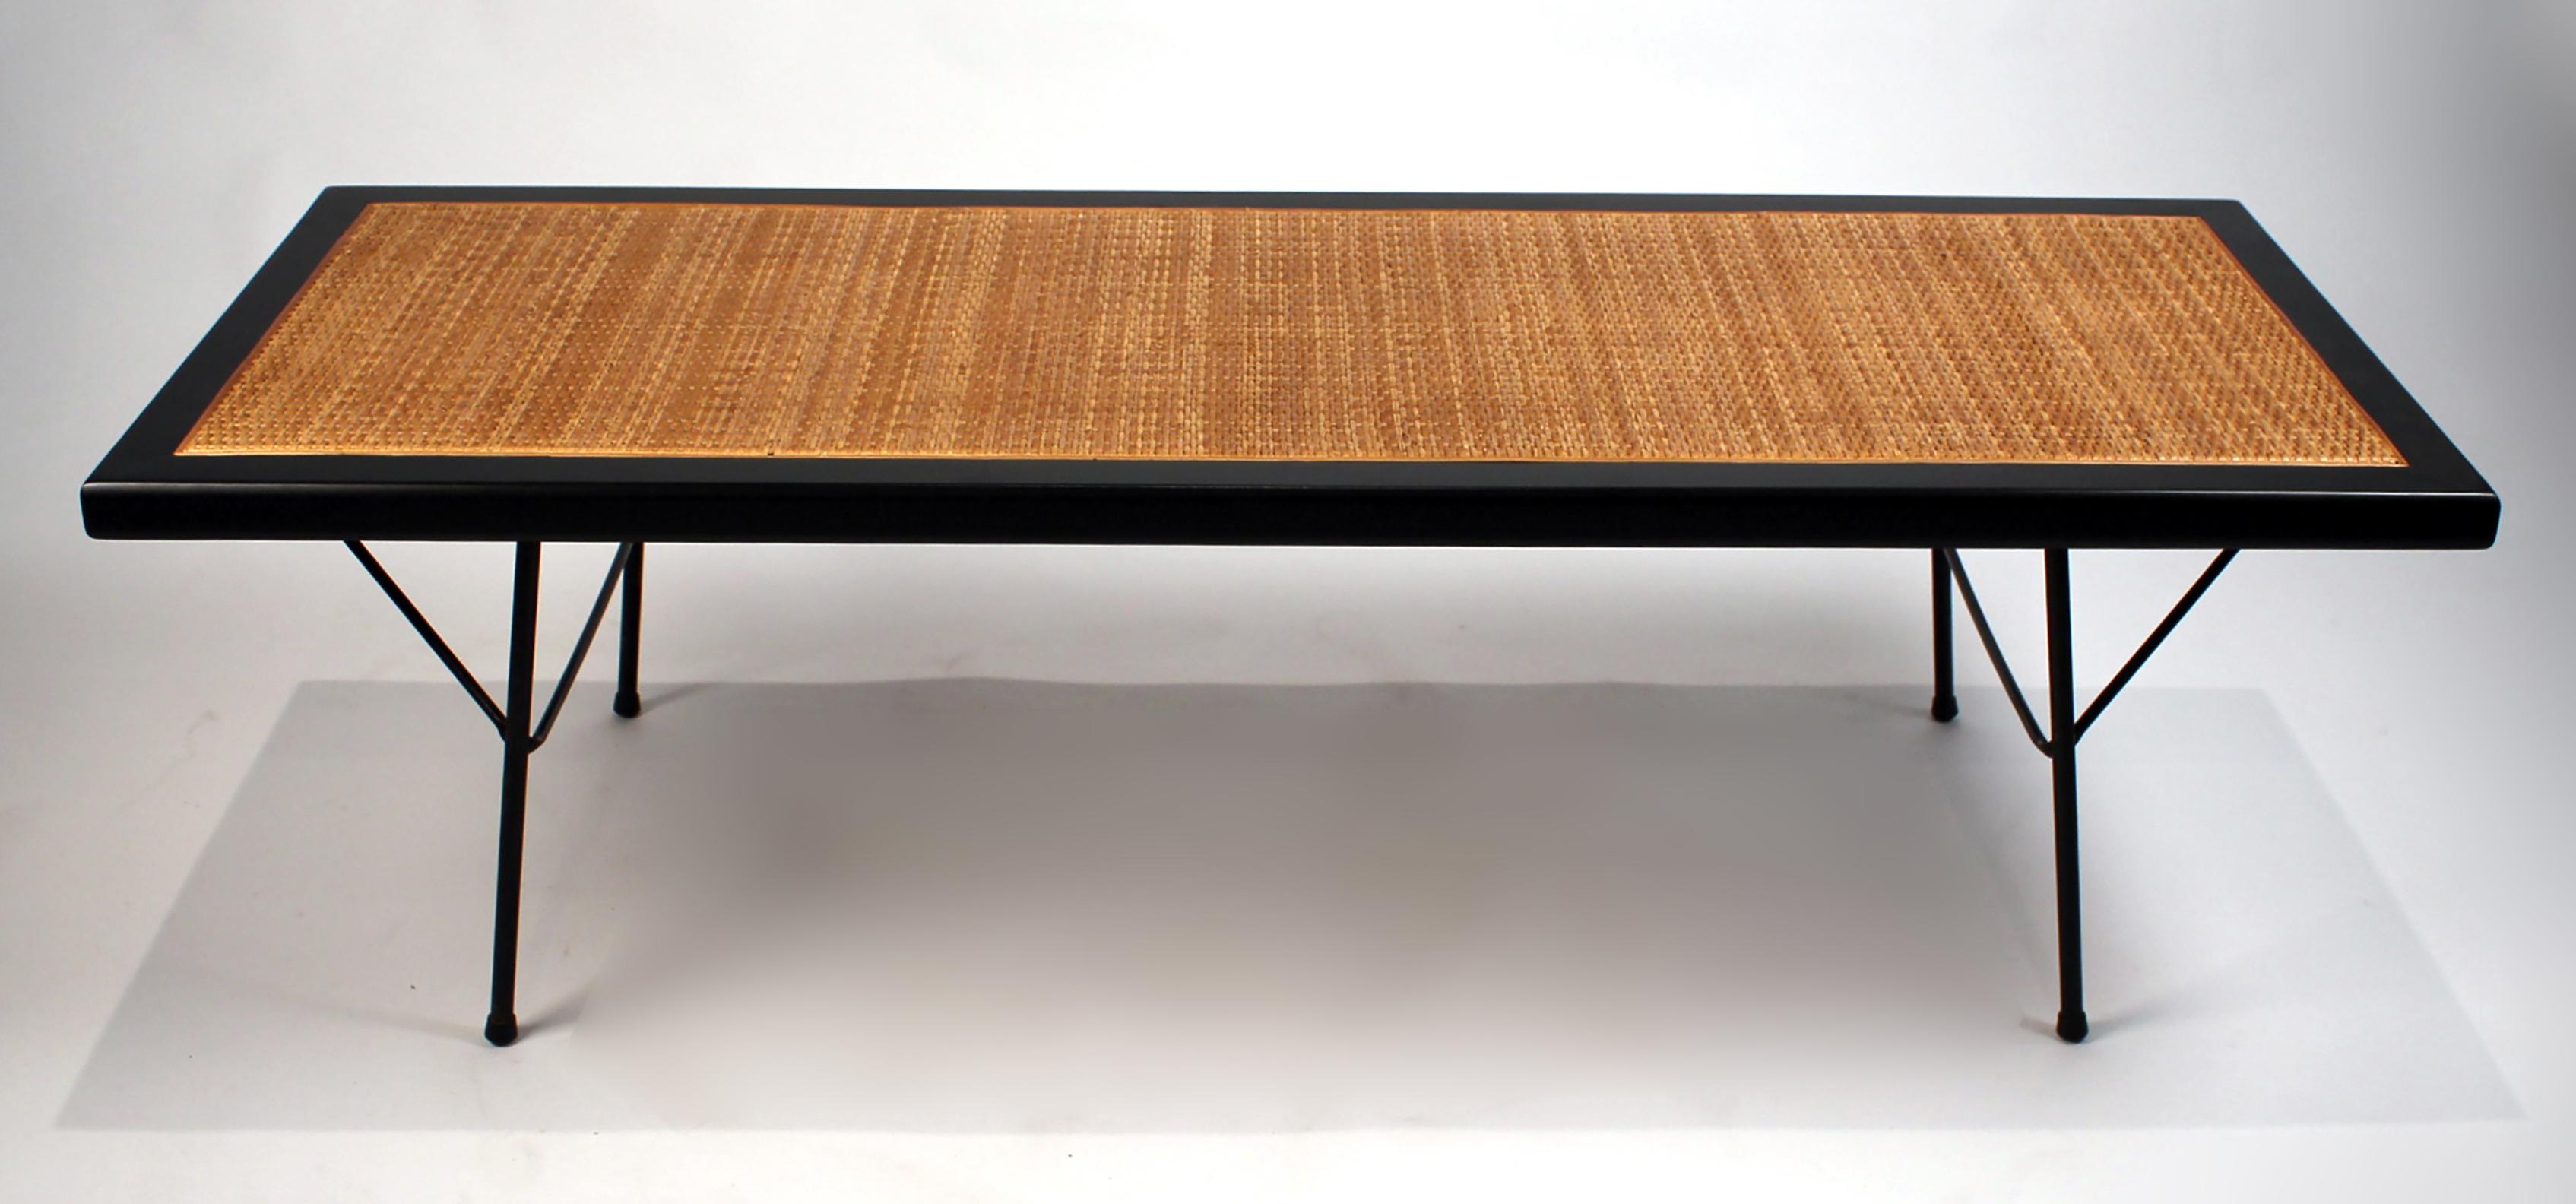 Rare cane bench model 5291 designed by George Nelson for Herman Miller, circa 1954. Both benches are in very good condition constructed of lacquered birch, cane, and enameled metal - price is per item.